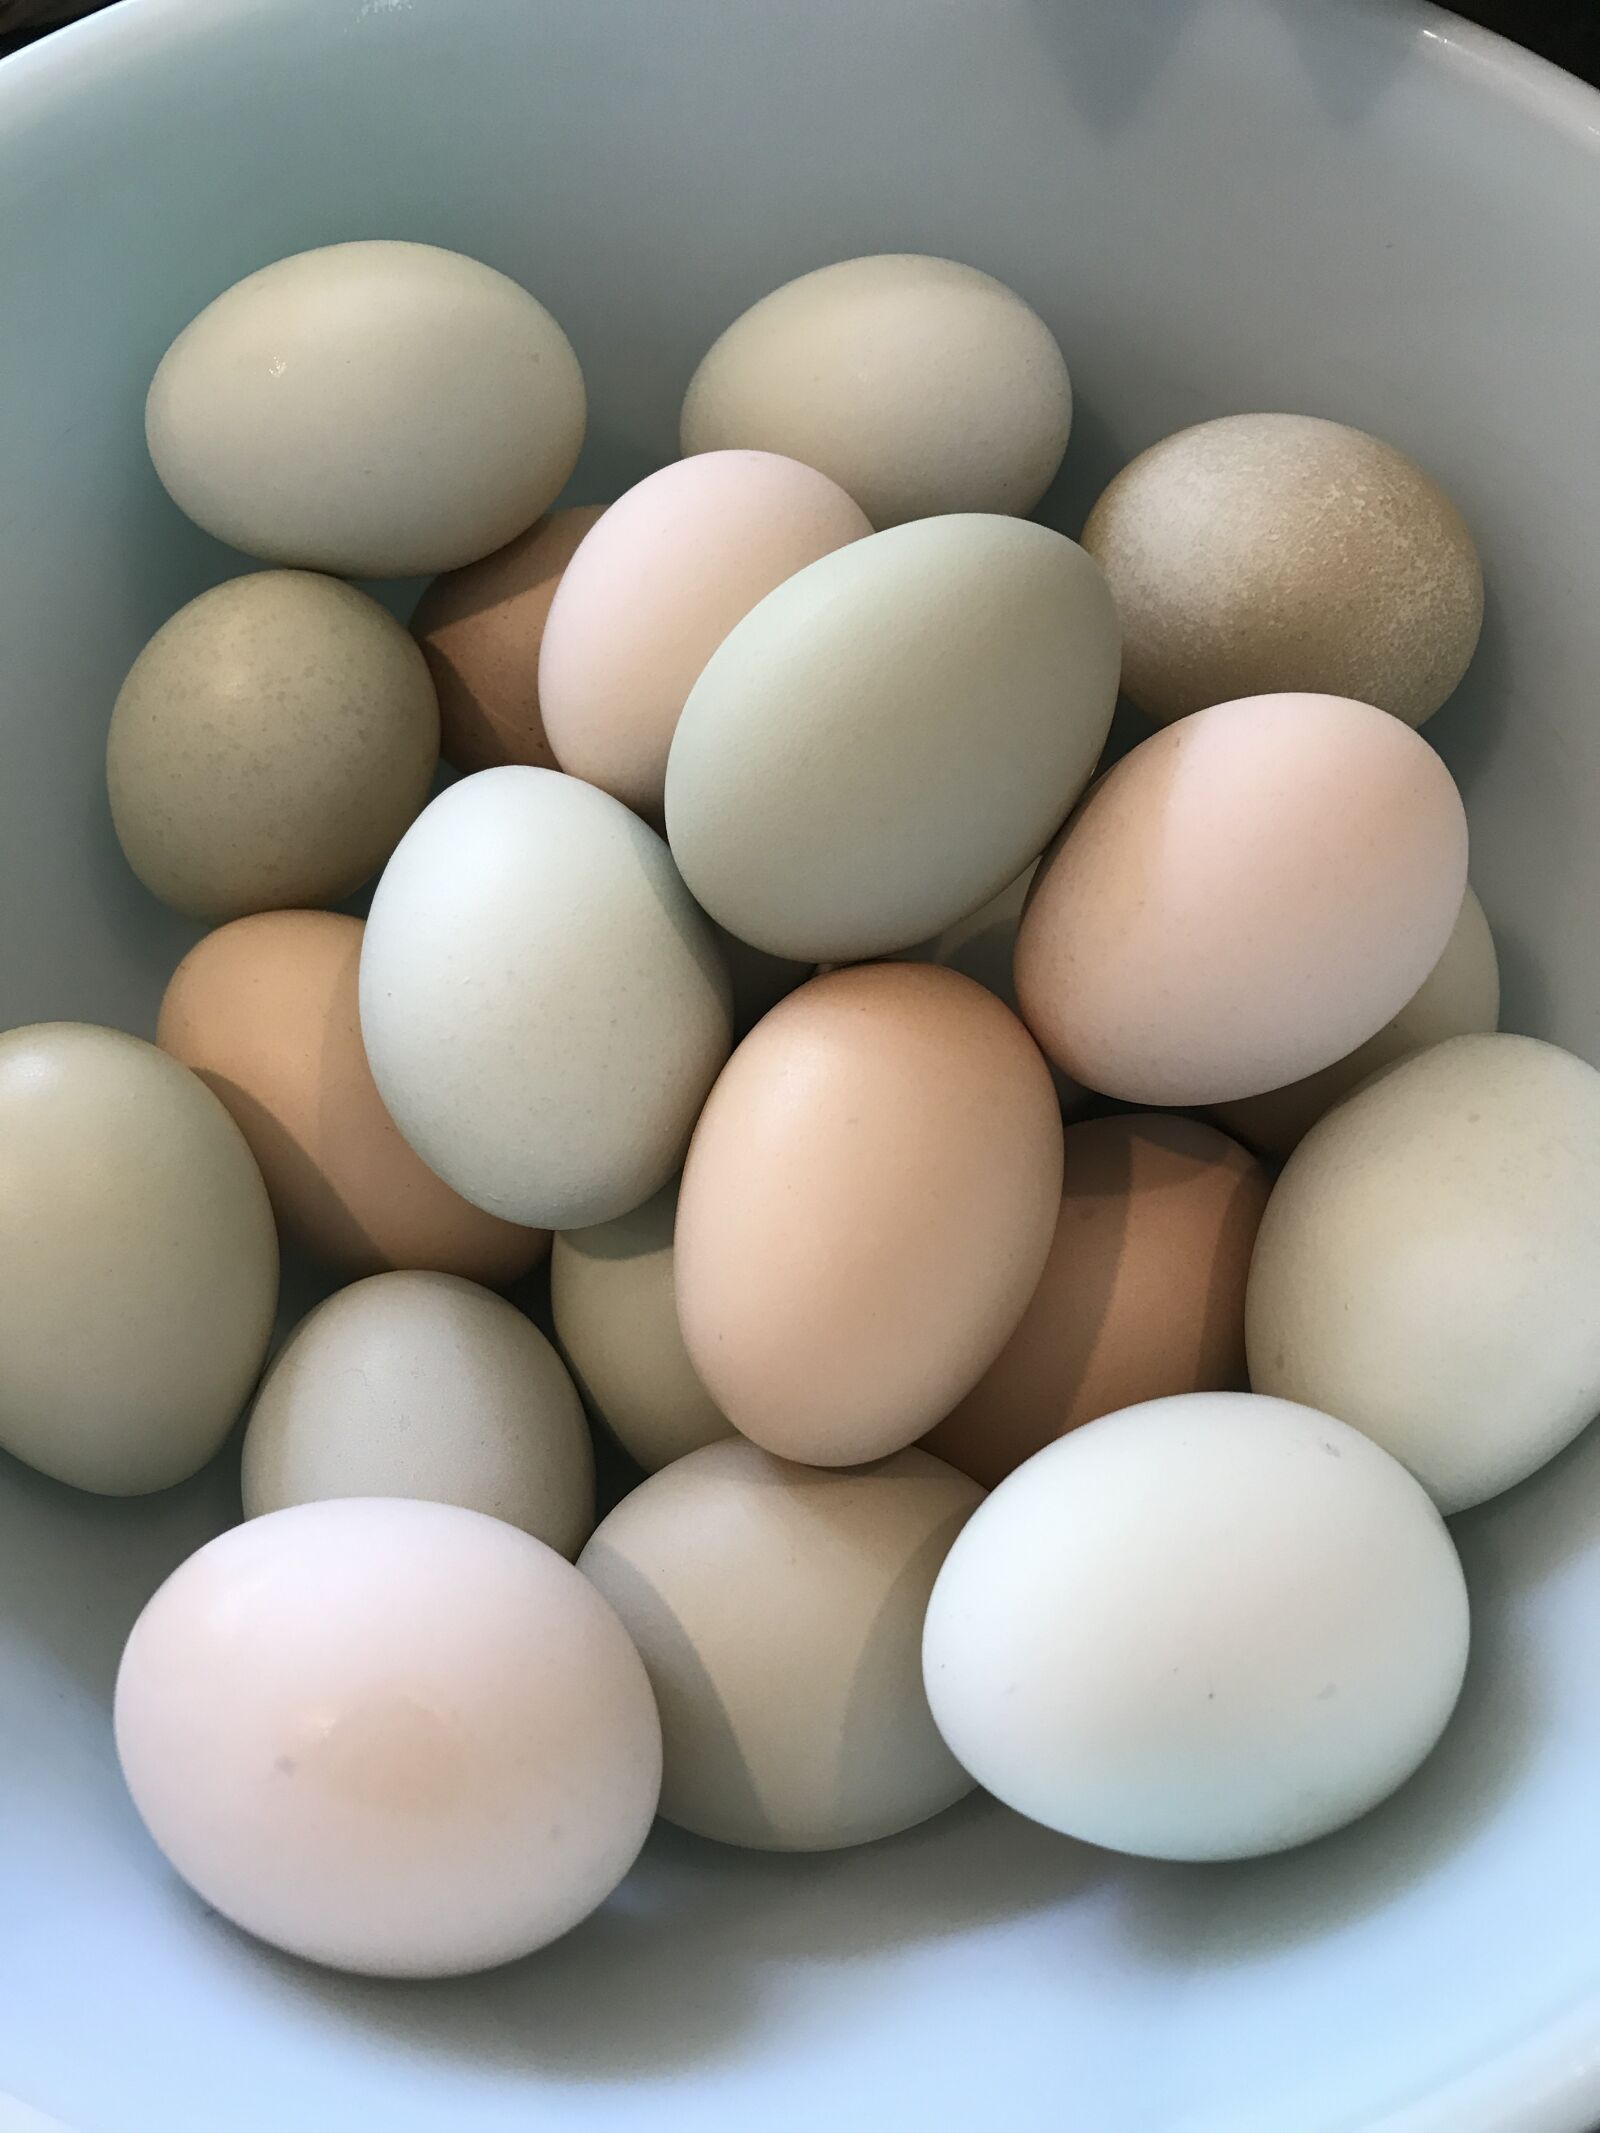 Apple iPhone 7 Plus sample photo. Eggs, pastel, homegrown photography